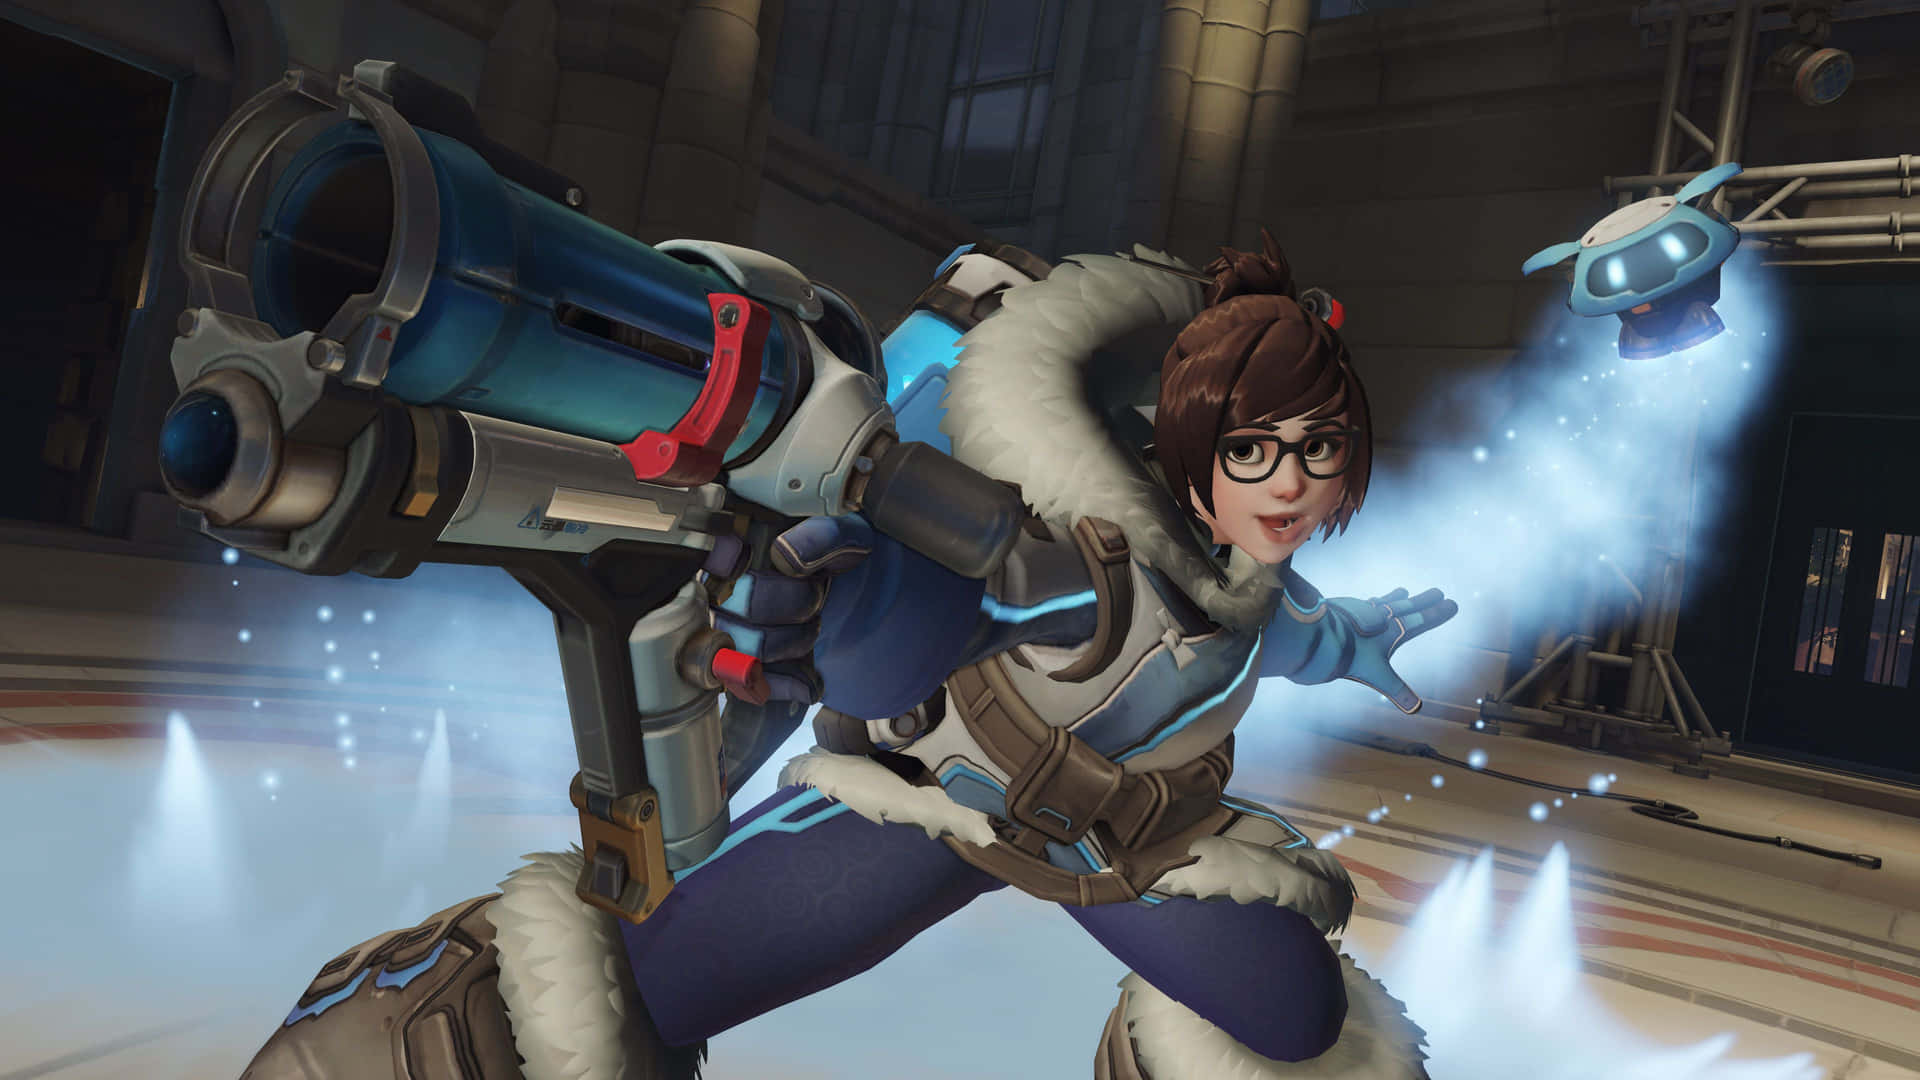 Overwatch's Mei ready for action on a snowy battleground Wallpaper